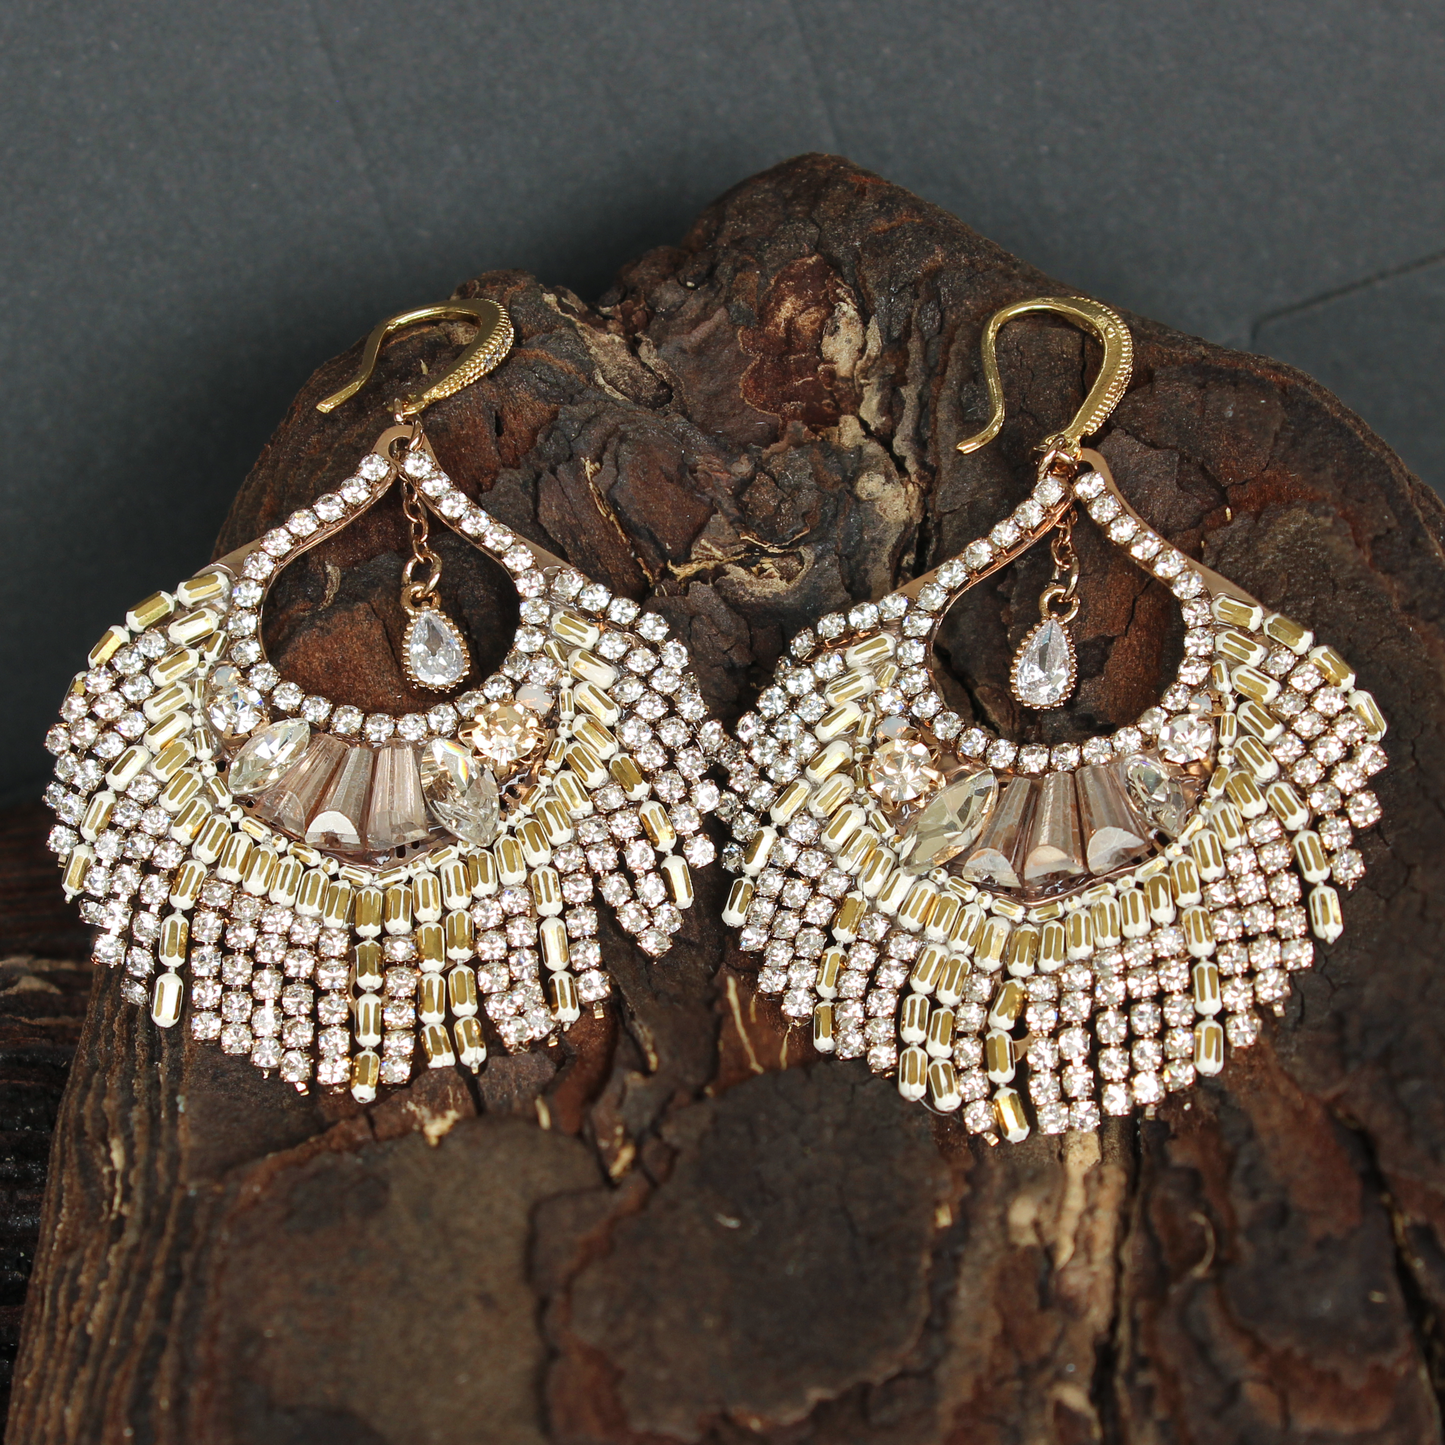 Gorgeous statement earrings.